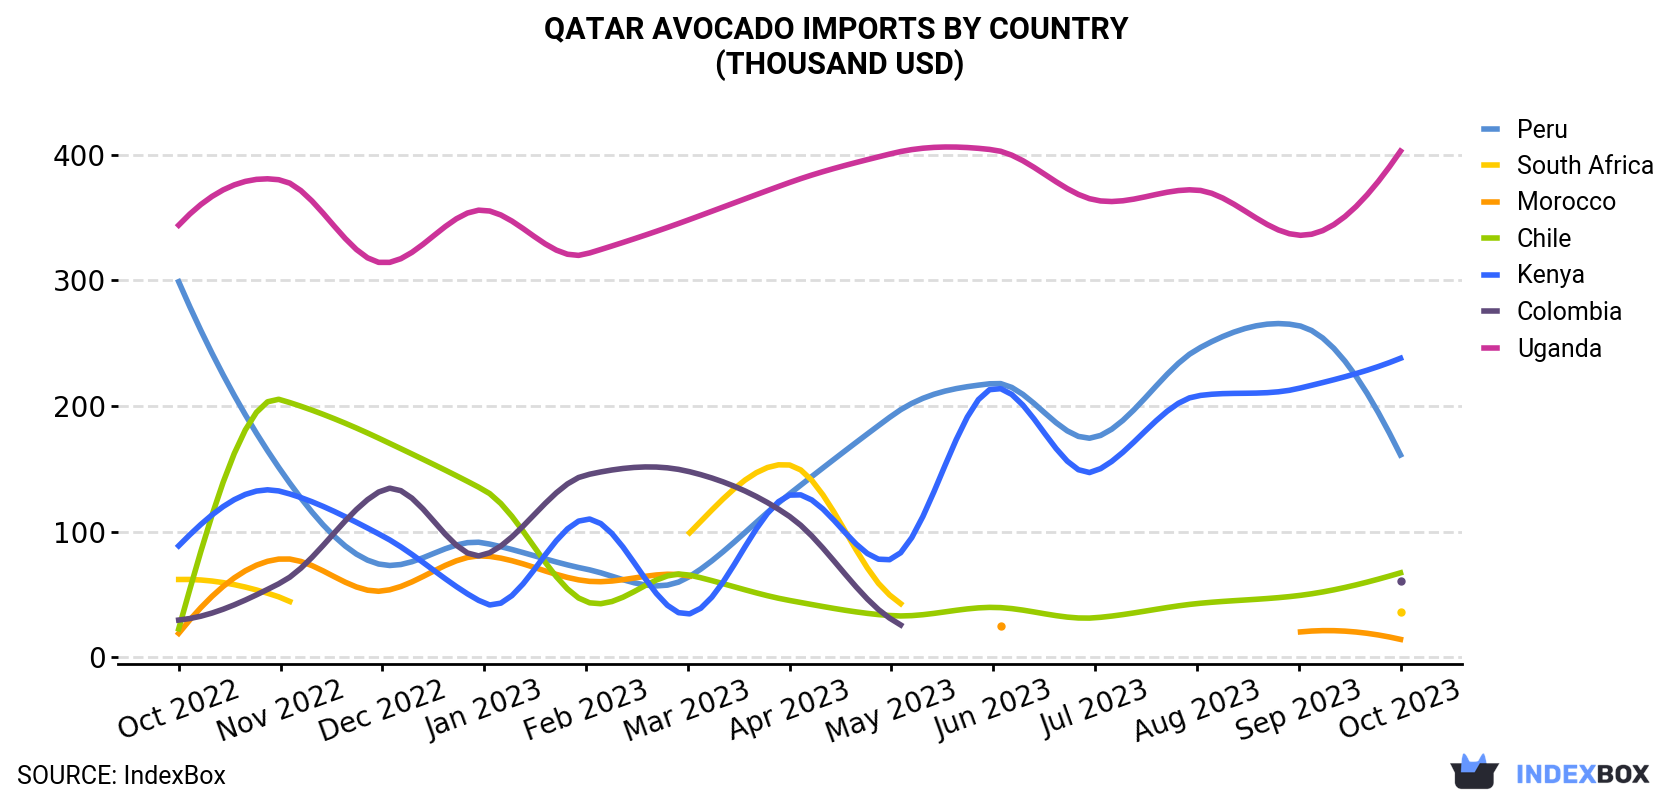 Qatar Avocado Imports By Country (Thousand USD)